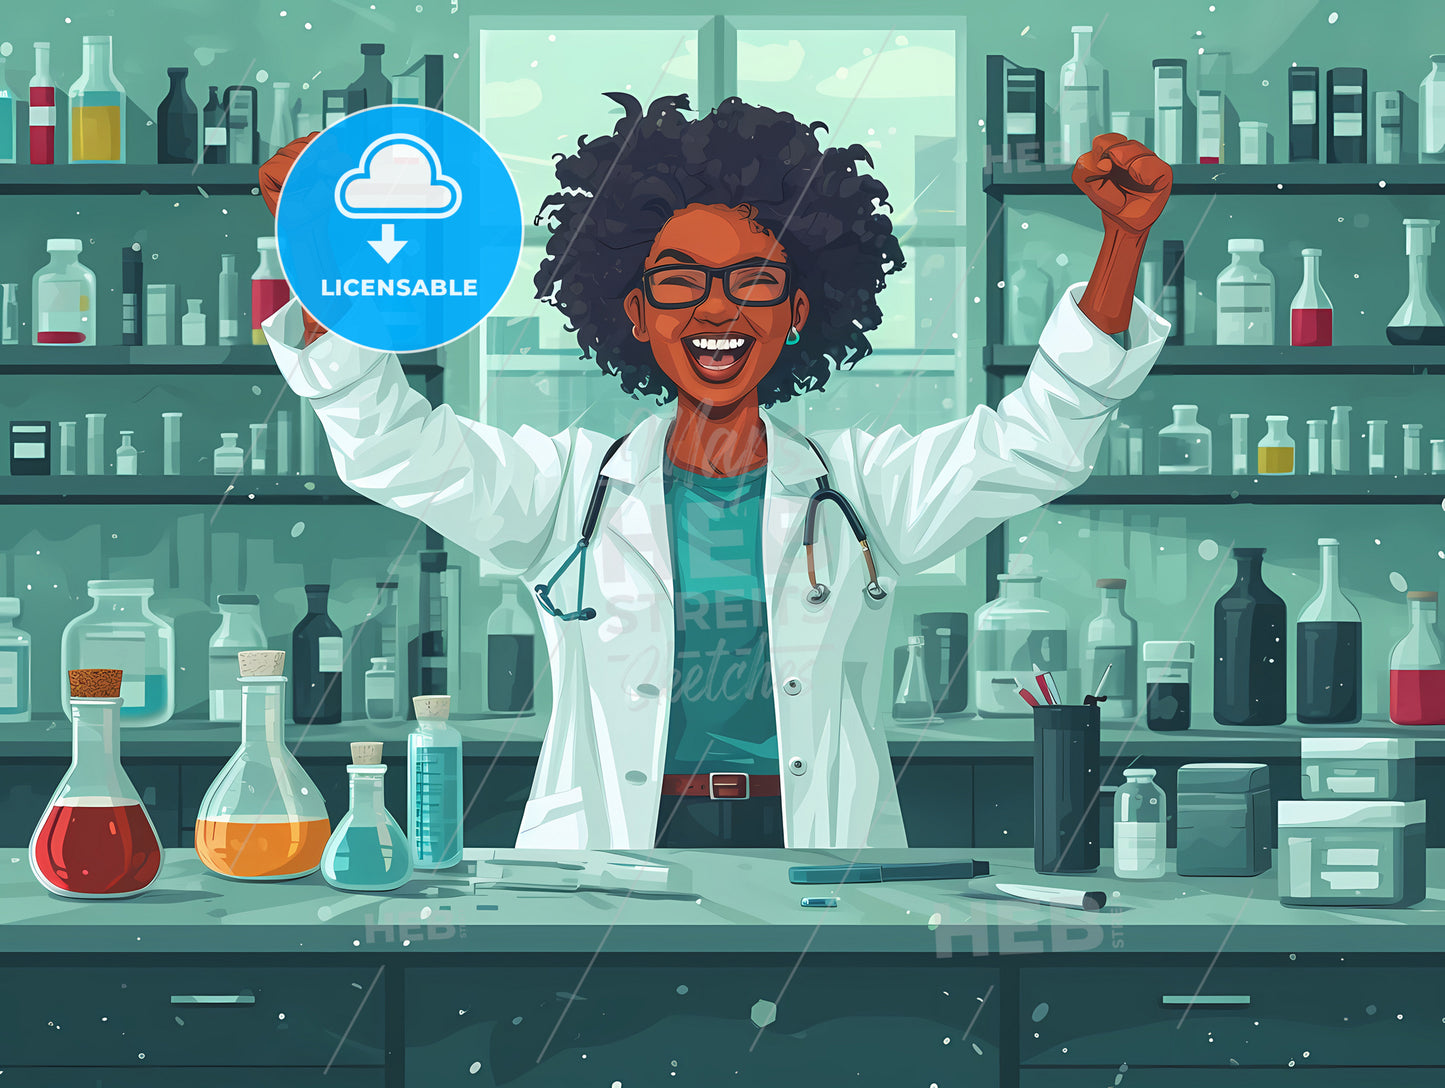 Black Man In A White Coat As A Chemistry Researcher, A Woman In A Lab Coat